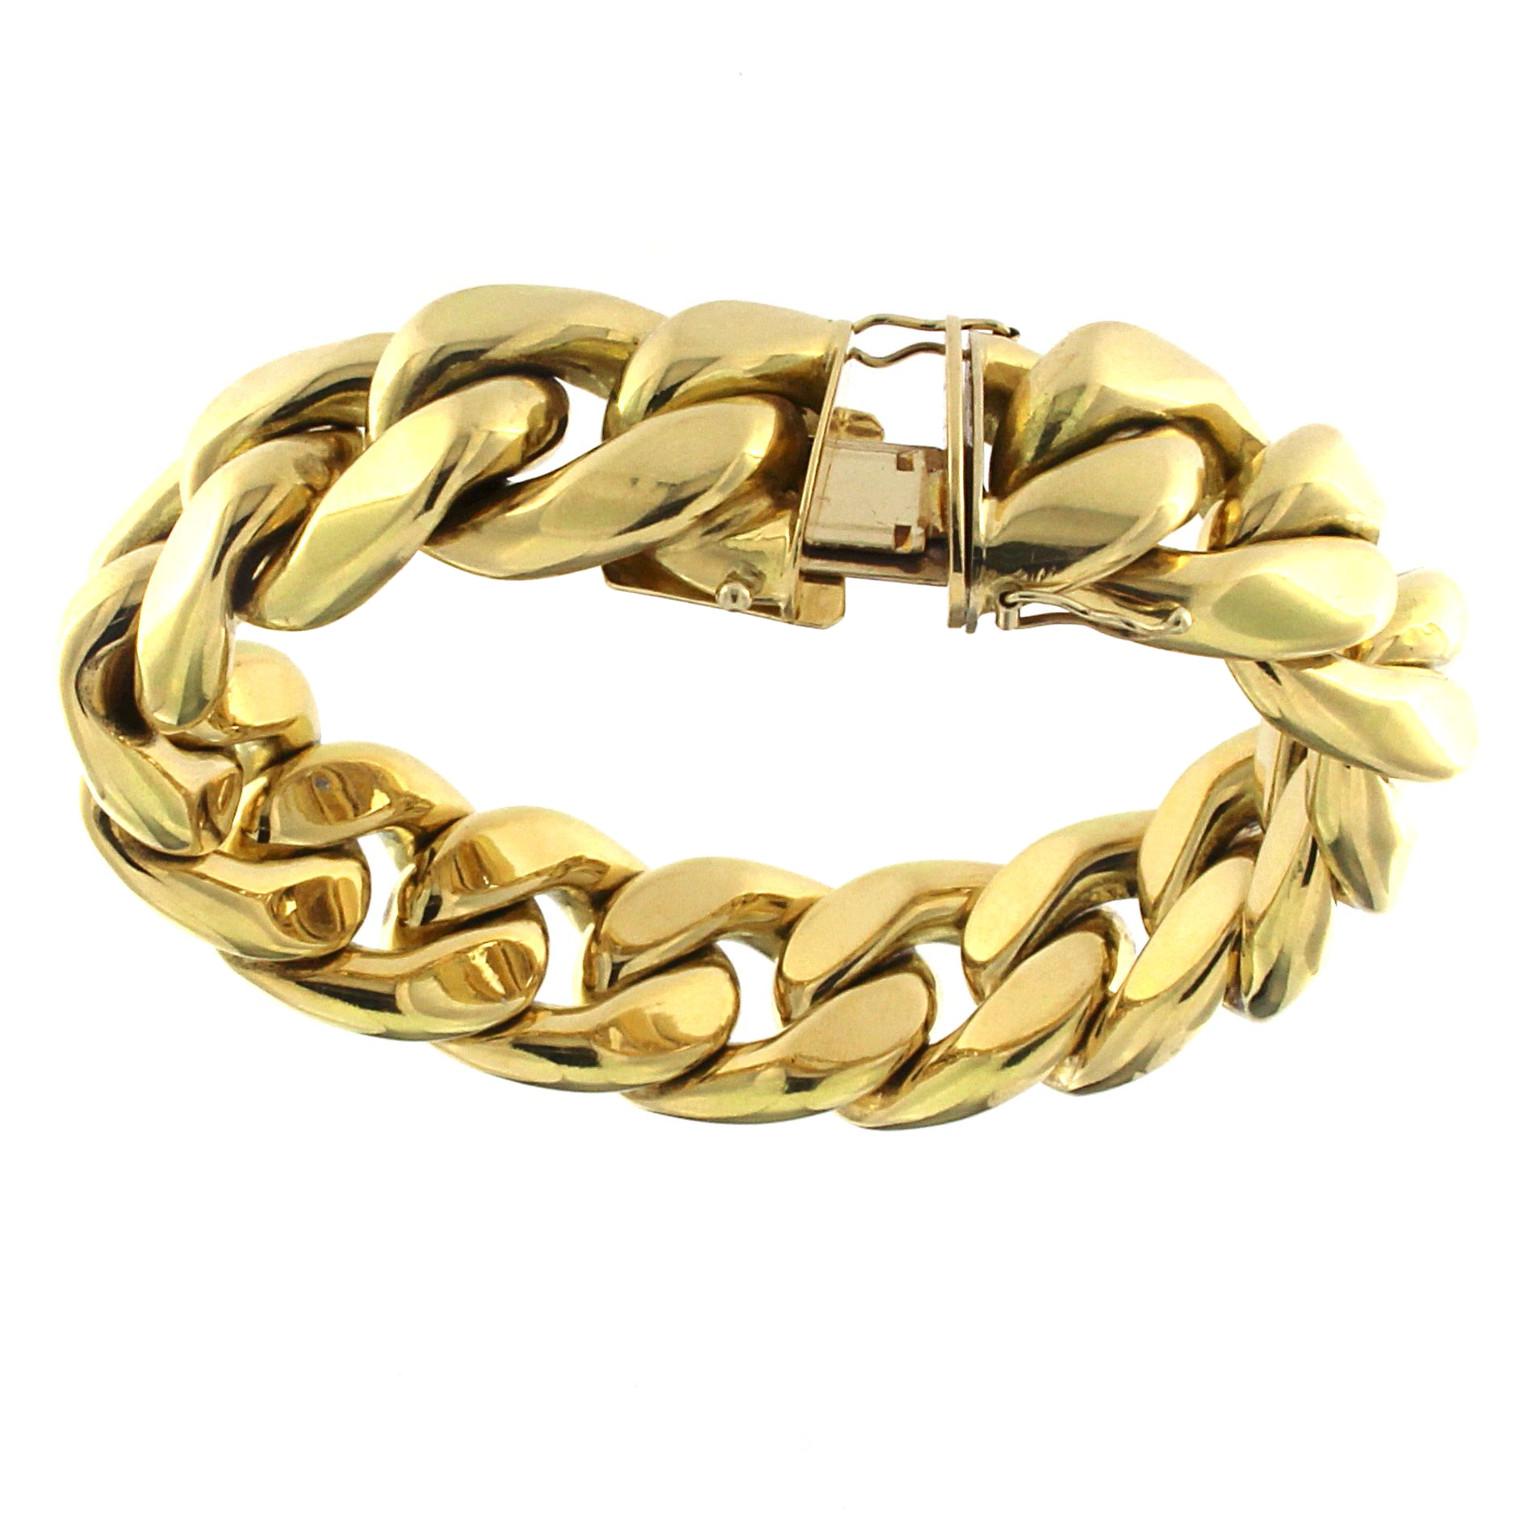 Groumette style coupled chain bracelet with great visual effect
Total weight of yellow gold 18 kt gr 112.60
Stamp 750

